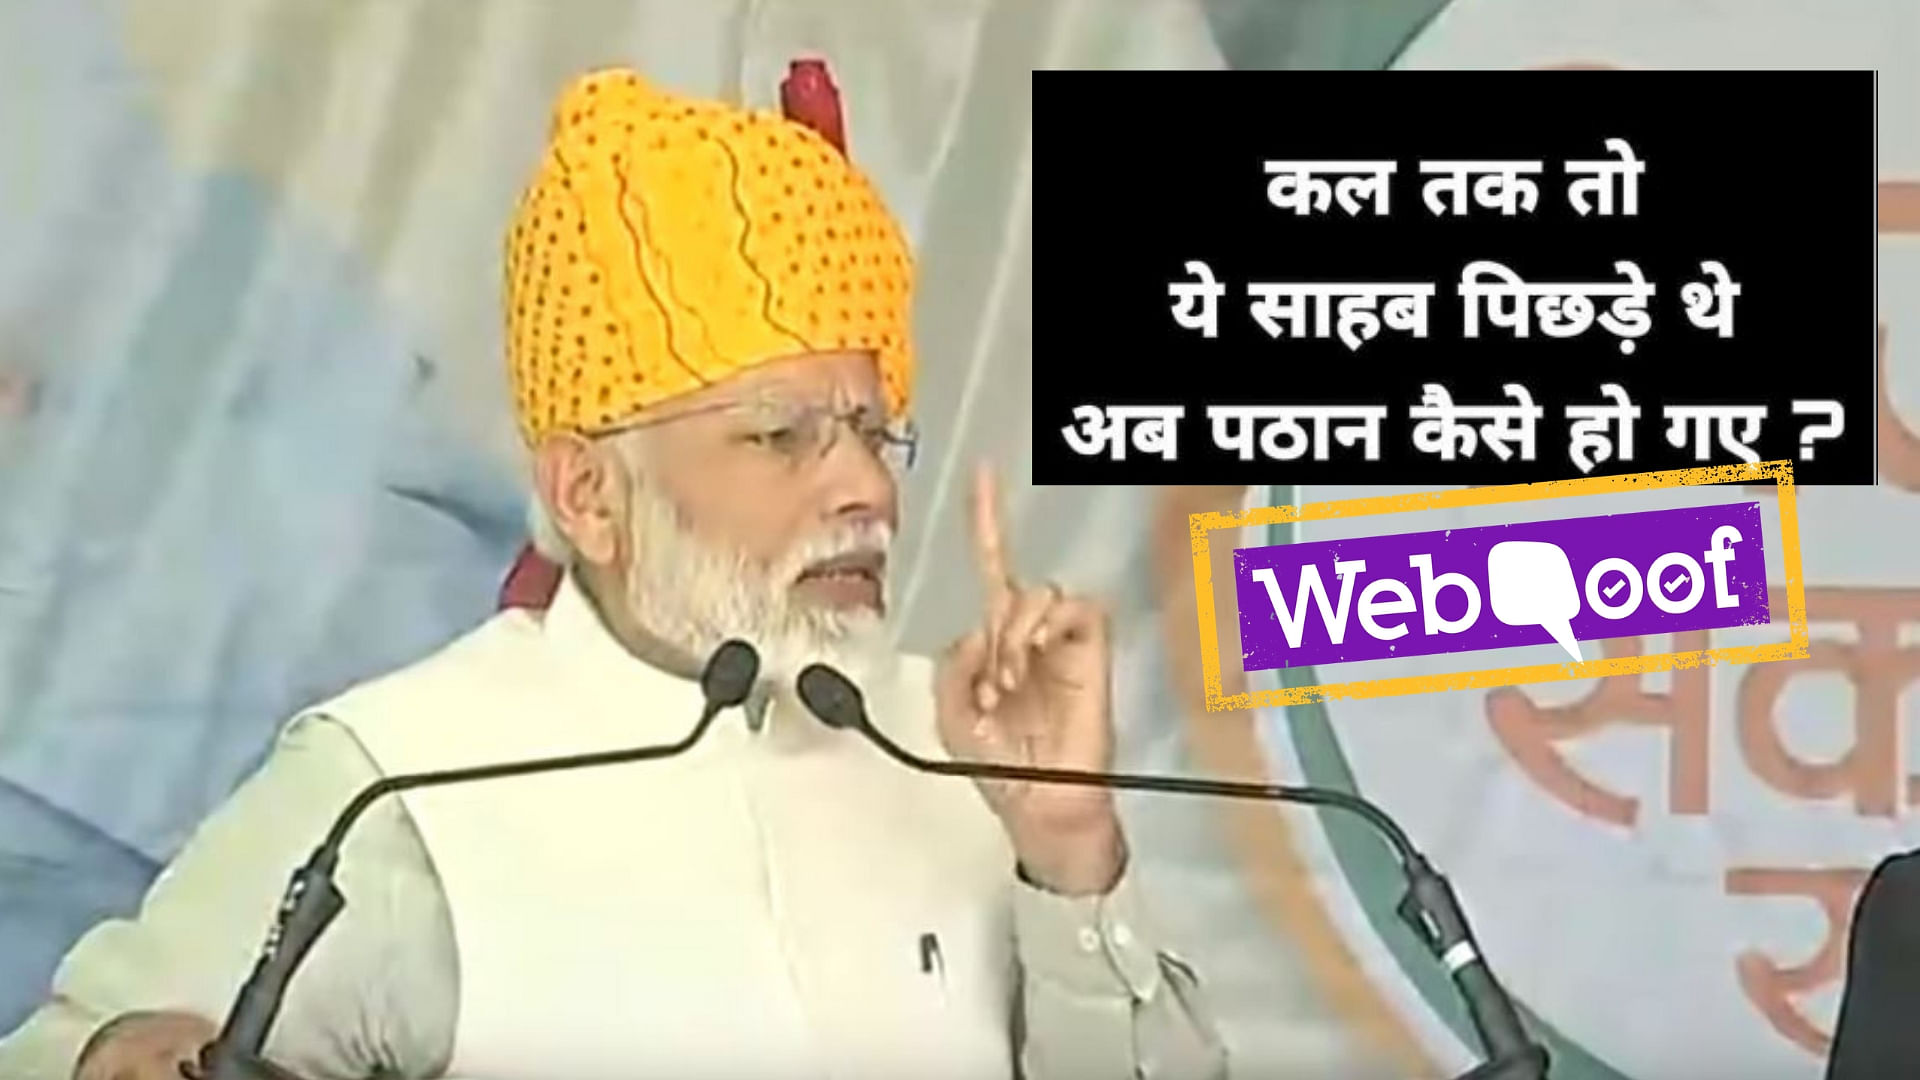 Video suggesting that Modi said that he was the child of a pathan has been doing the rounds.